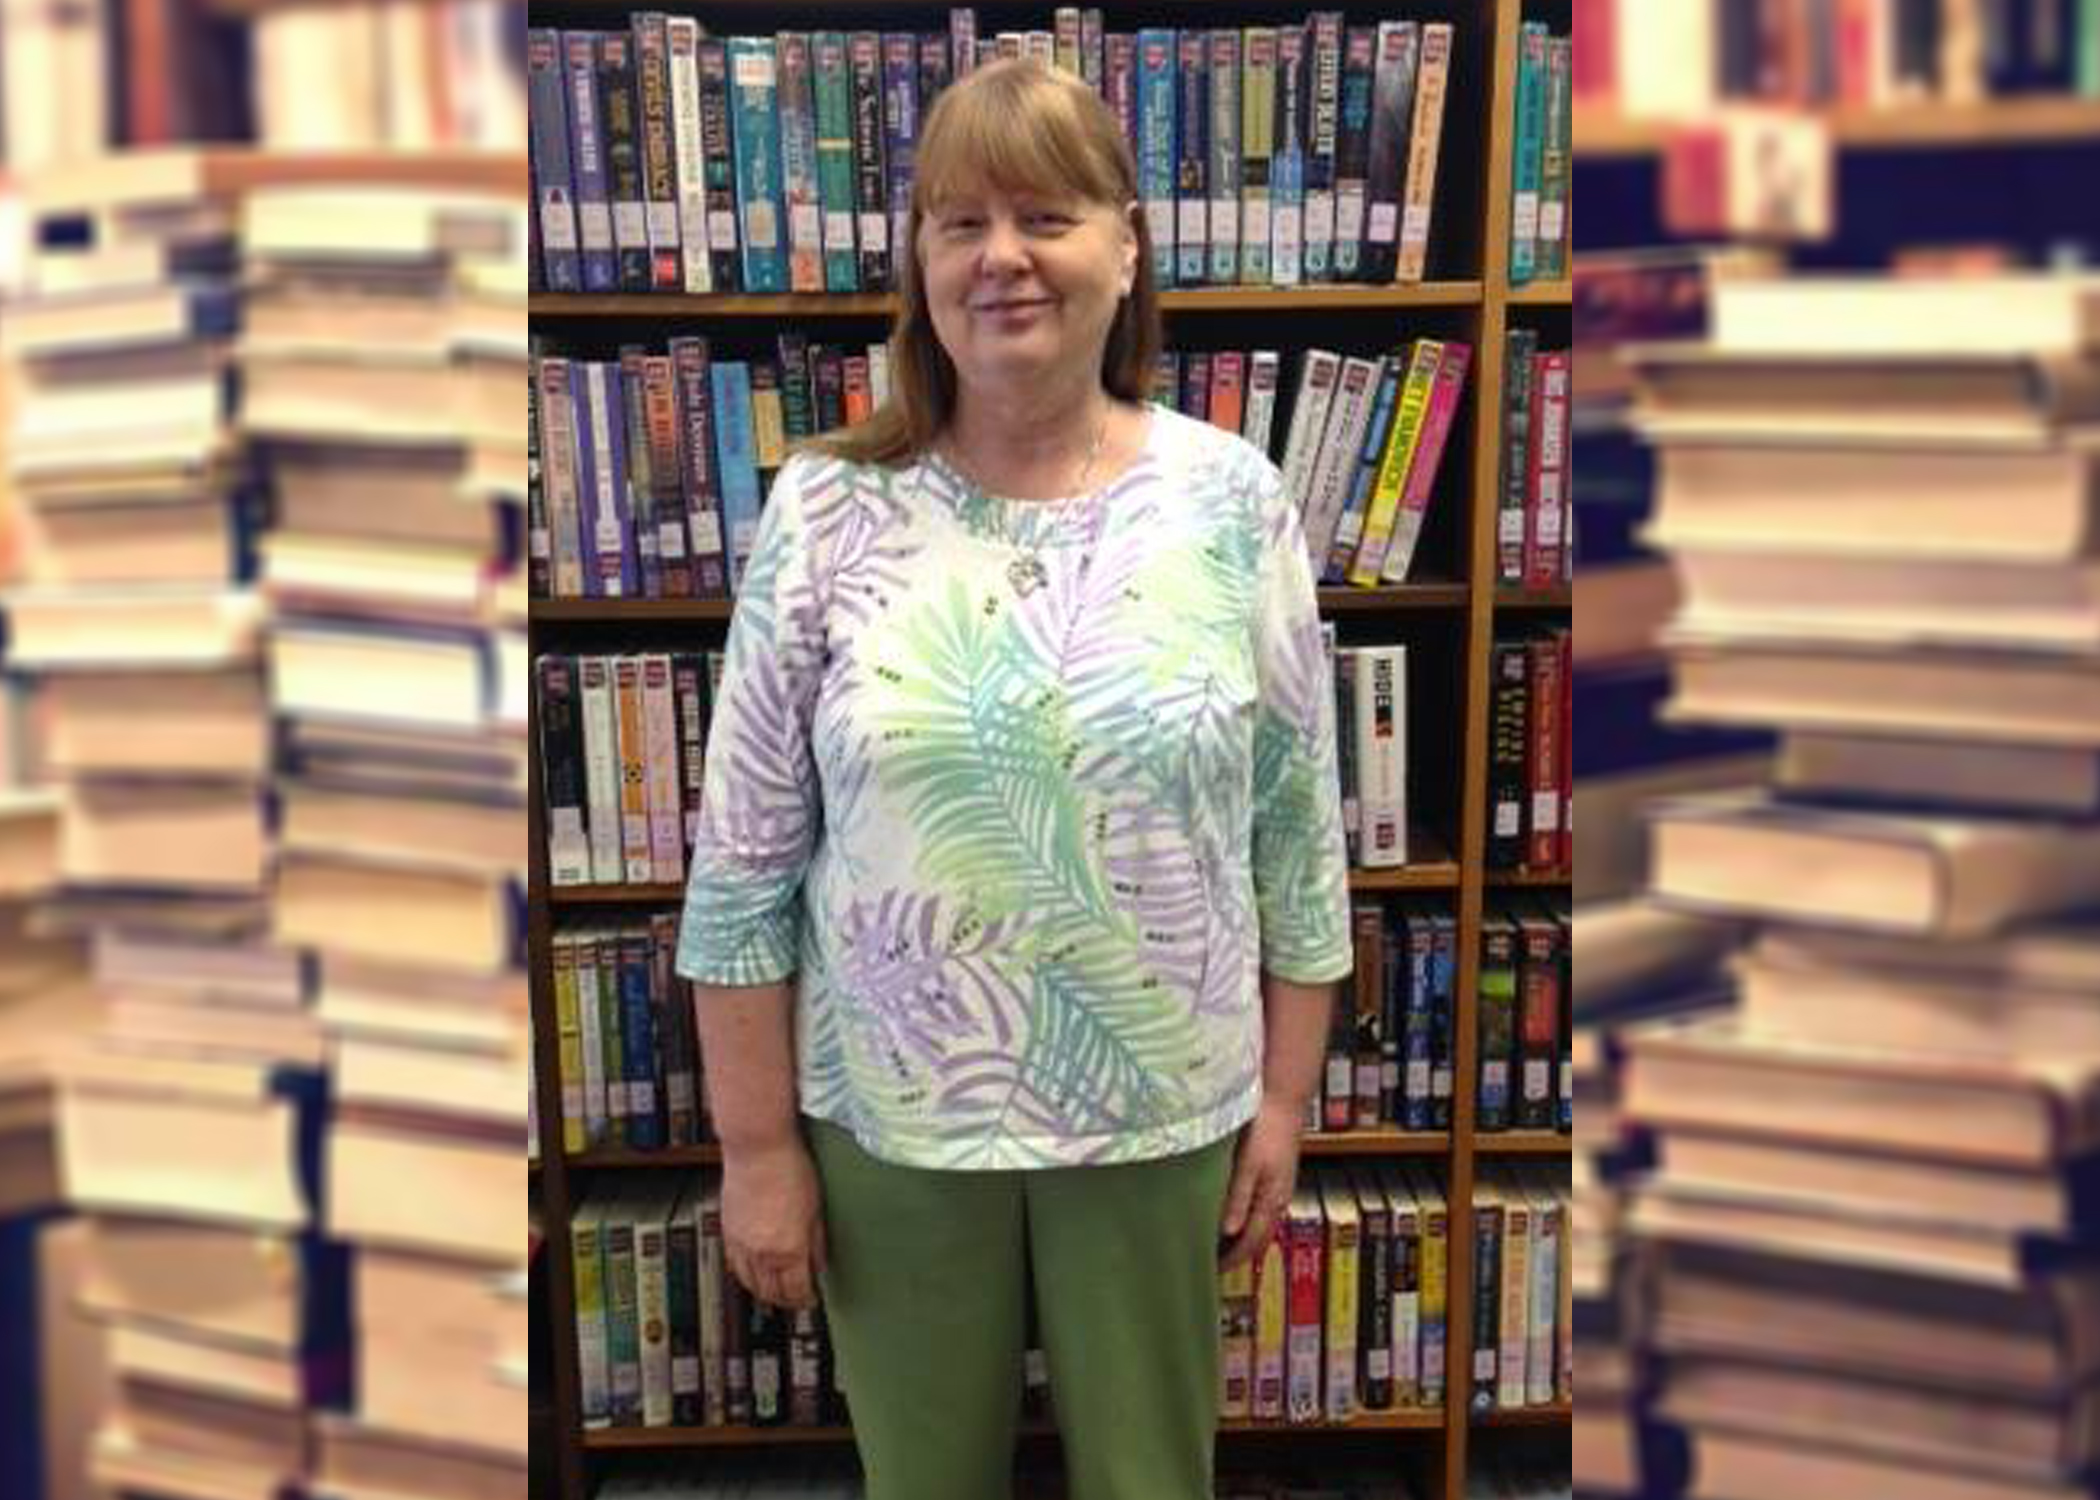 Leeds librarian retires after more than 20 years of service